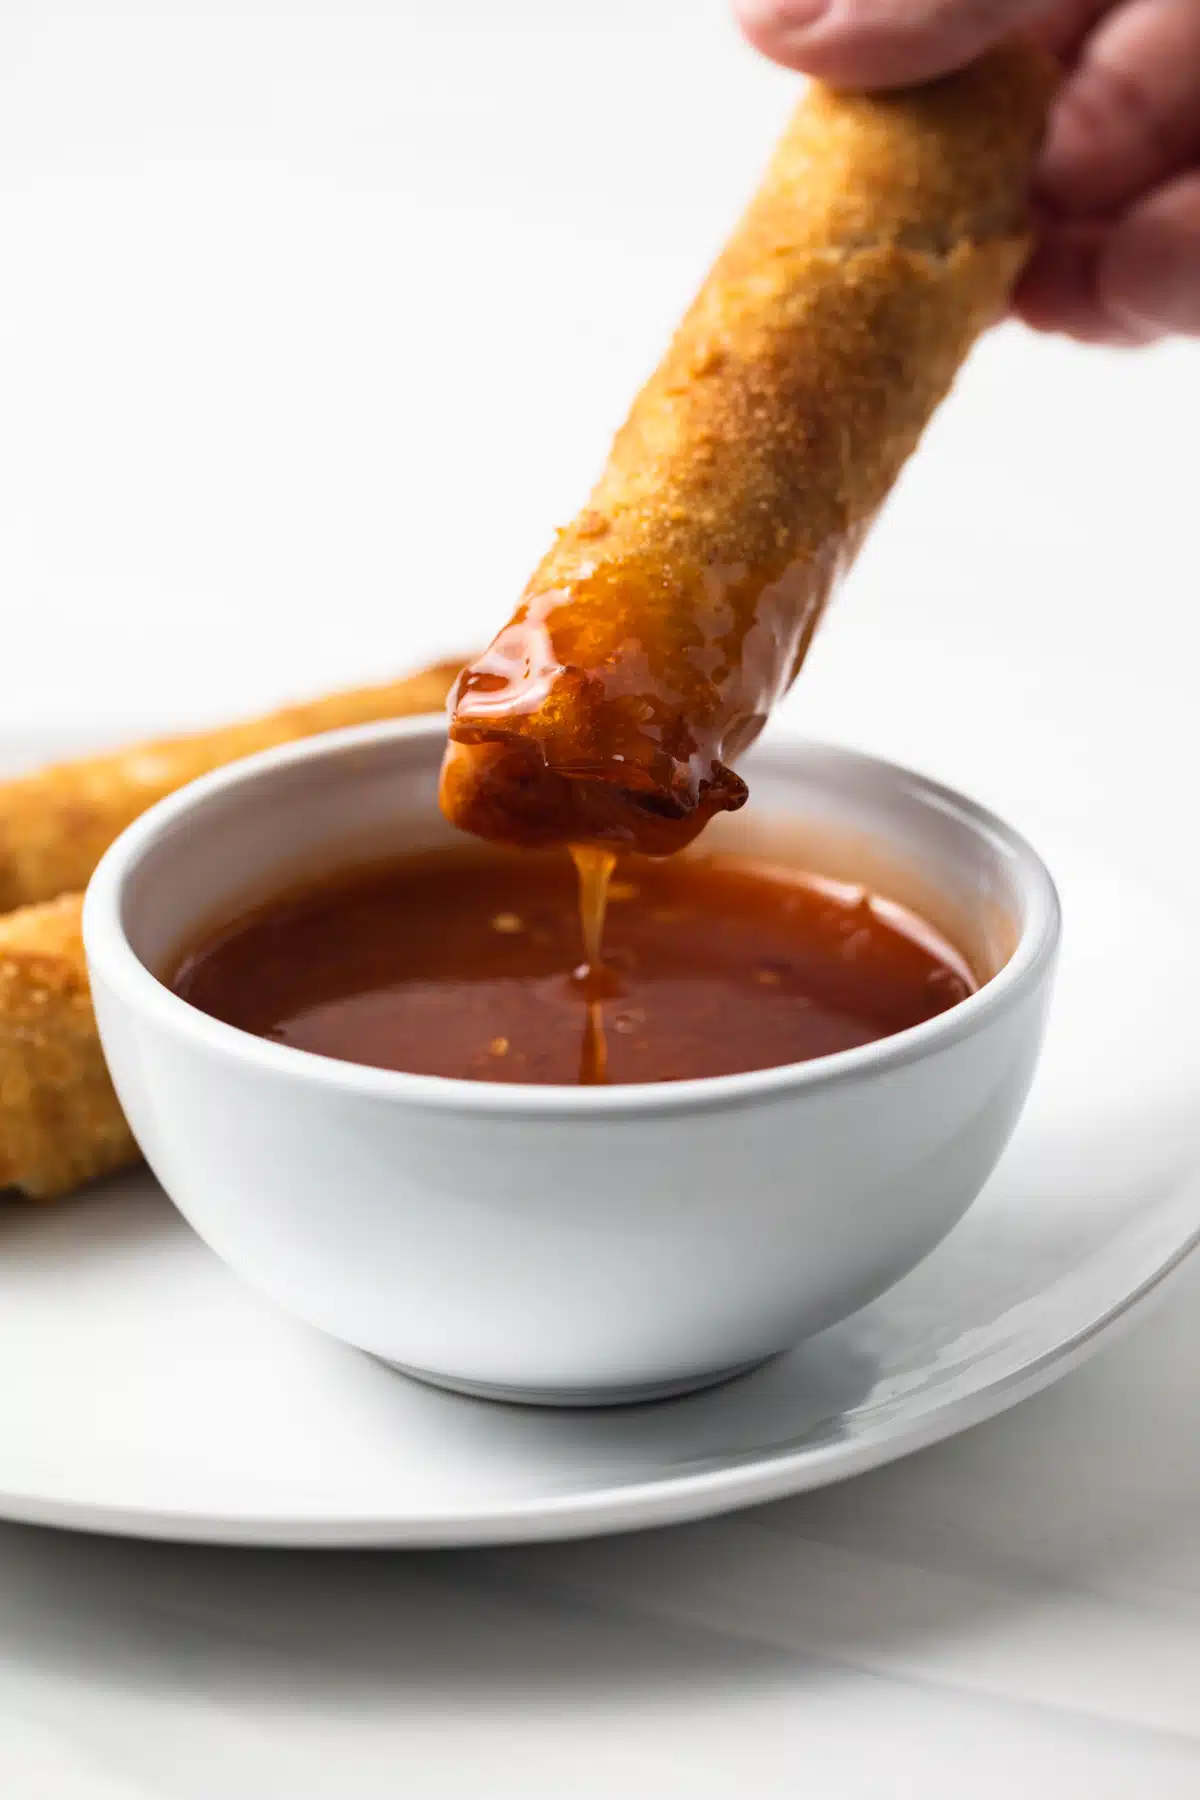 Eggroll dipped in sweet chili sauce.